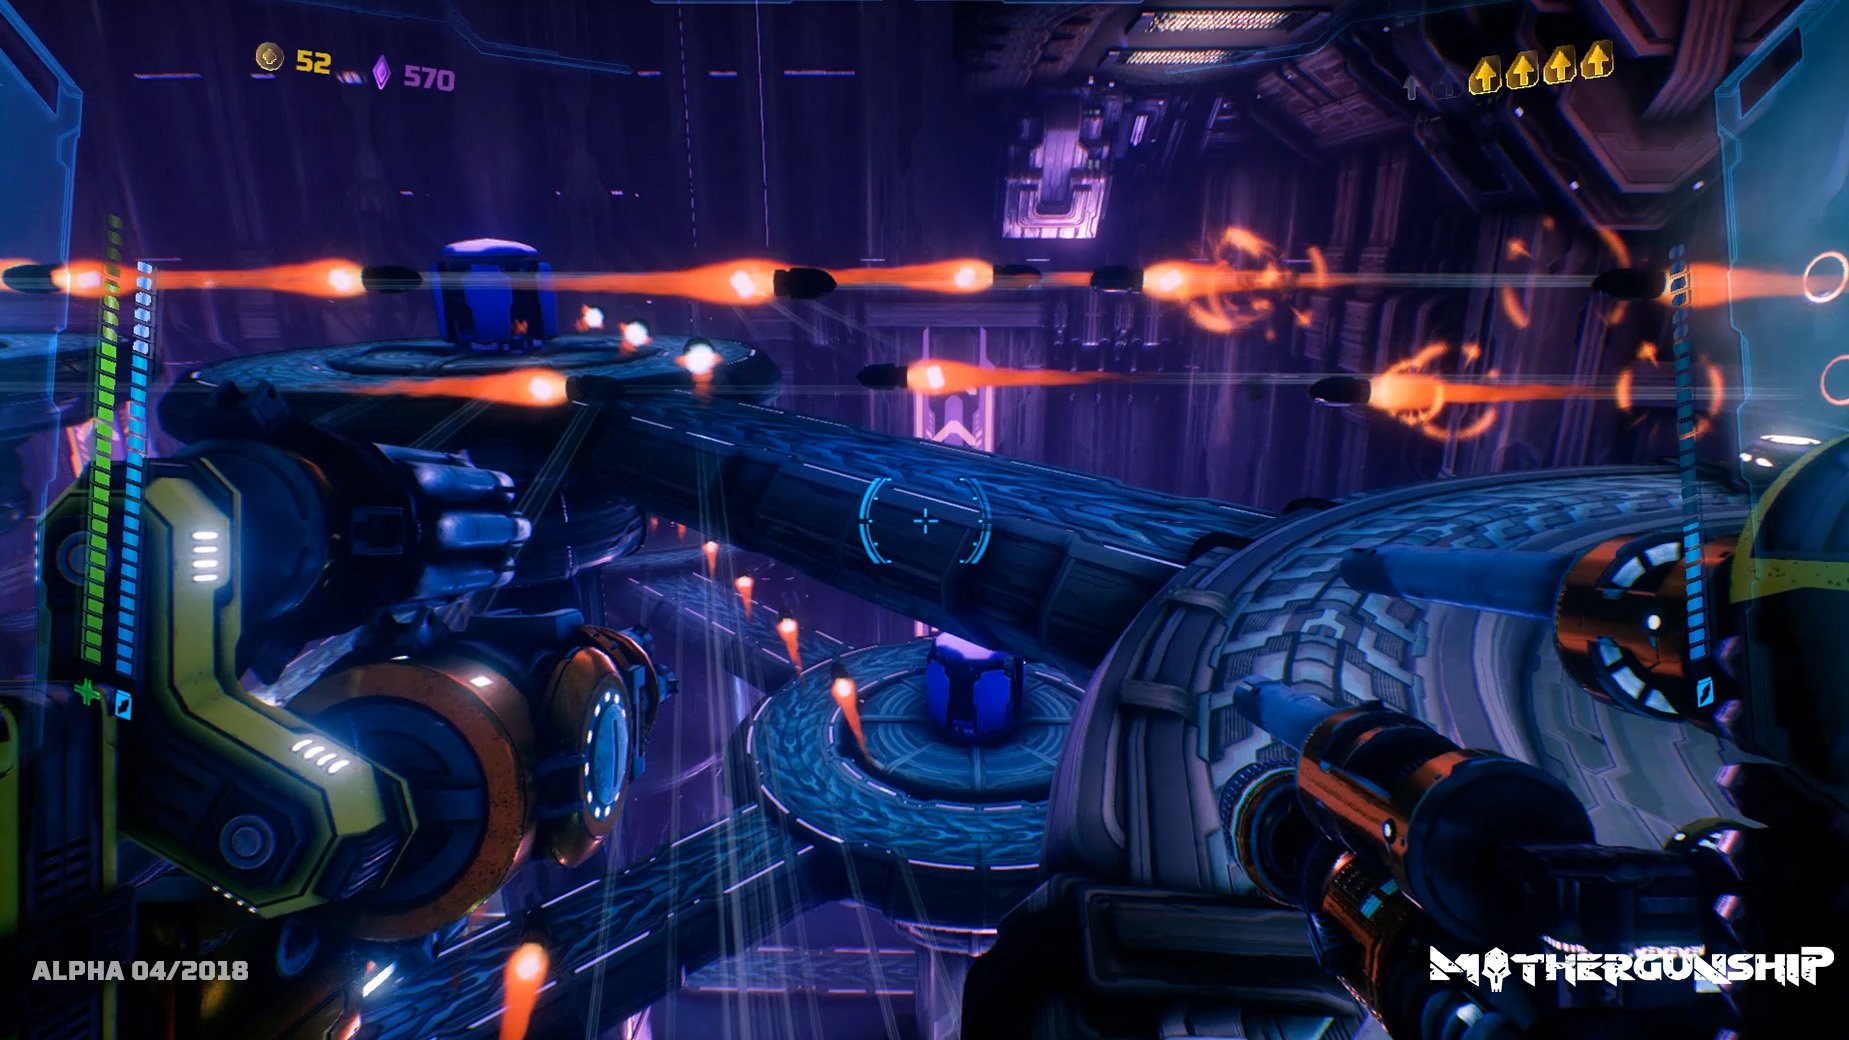 Mothergunship We Are Back From Paxeast18 Full Of Energy And With Some New Action Screenshots From The Neon Level Screenshotsaturday Mothergunship Bullethell Fps Indiegame Gamedev Crafting T Co Abky9rhng5